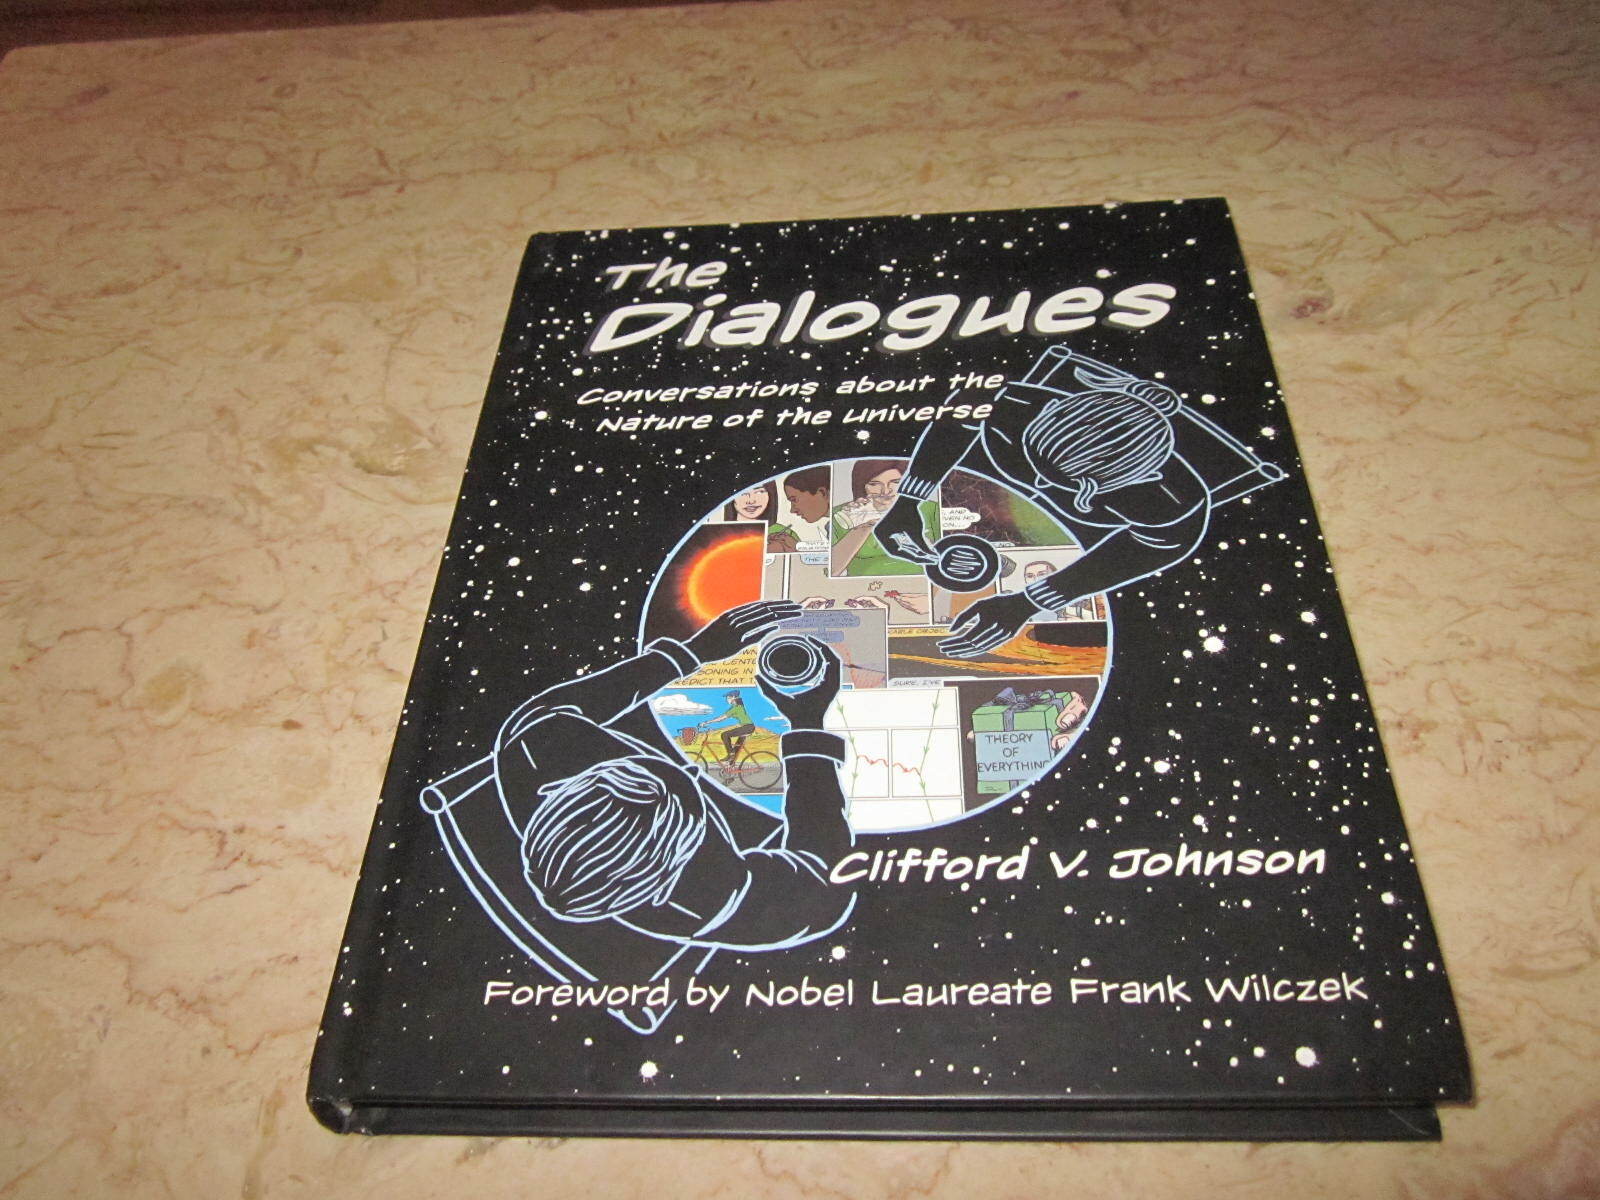 The Dialogues: Conversations About The Nature Of The Universe